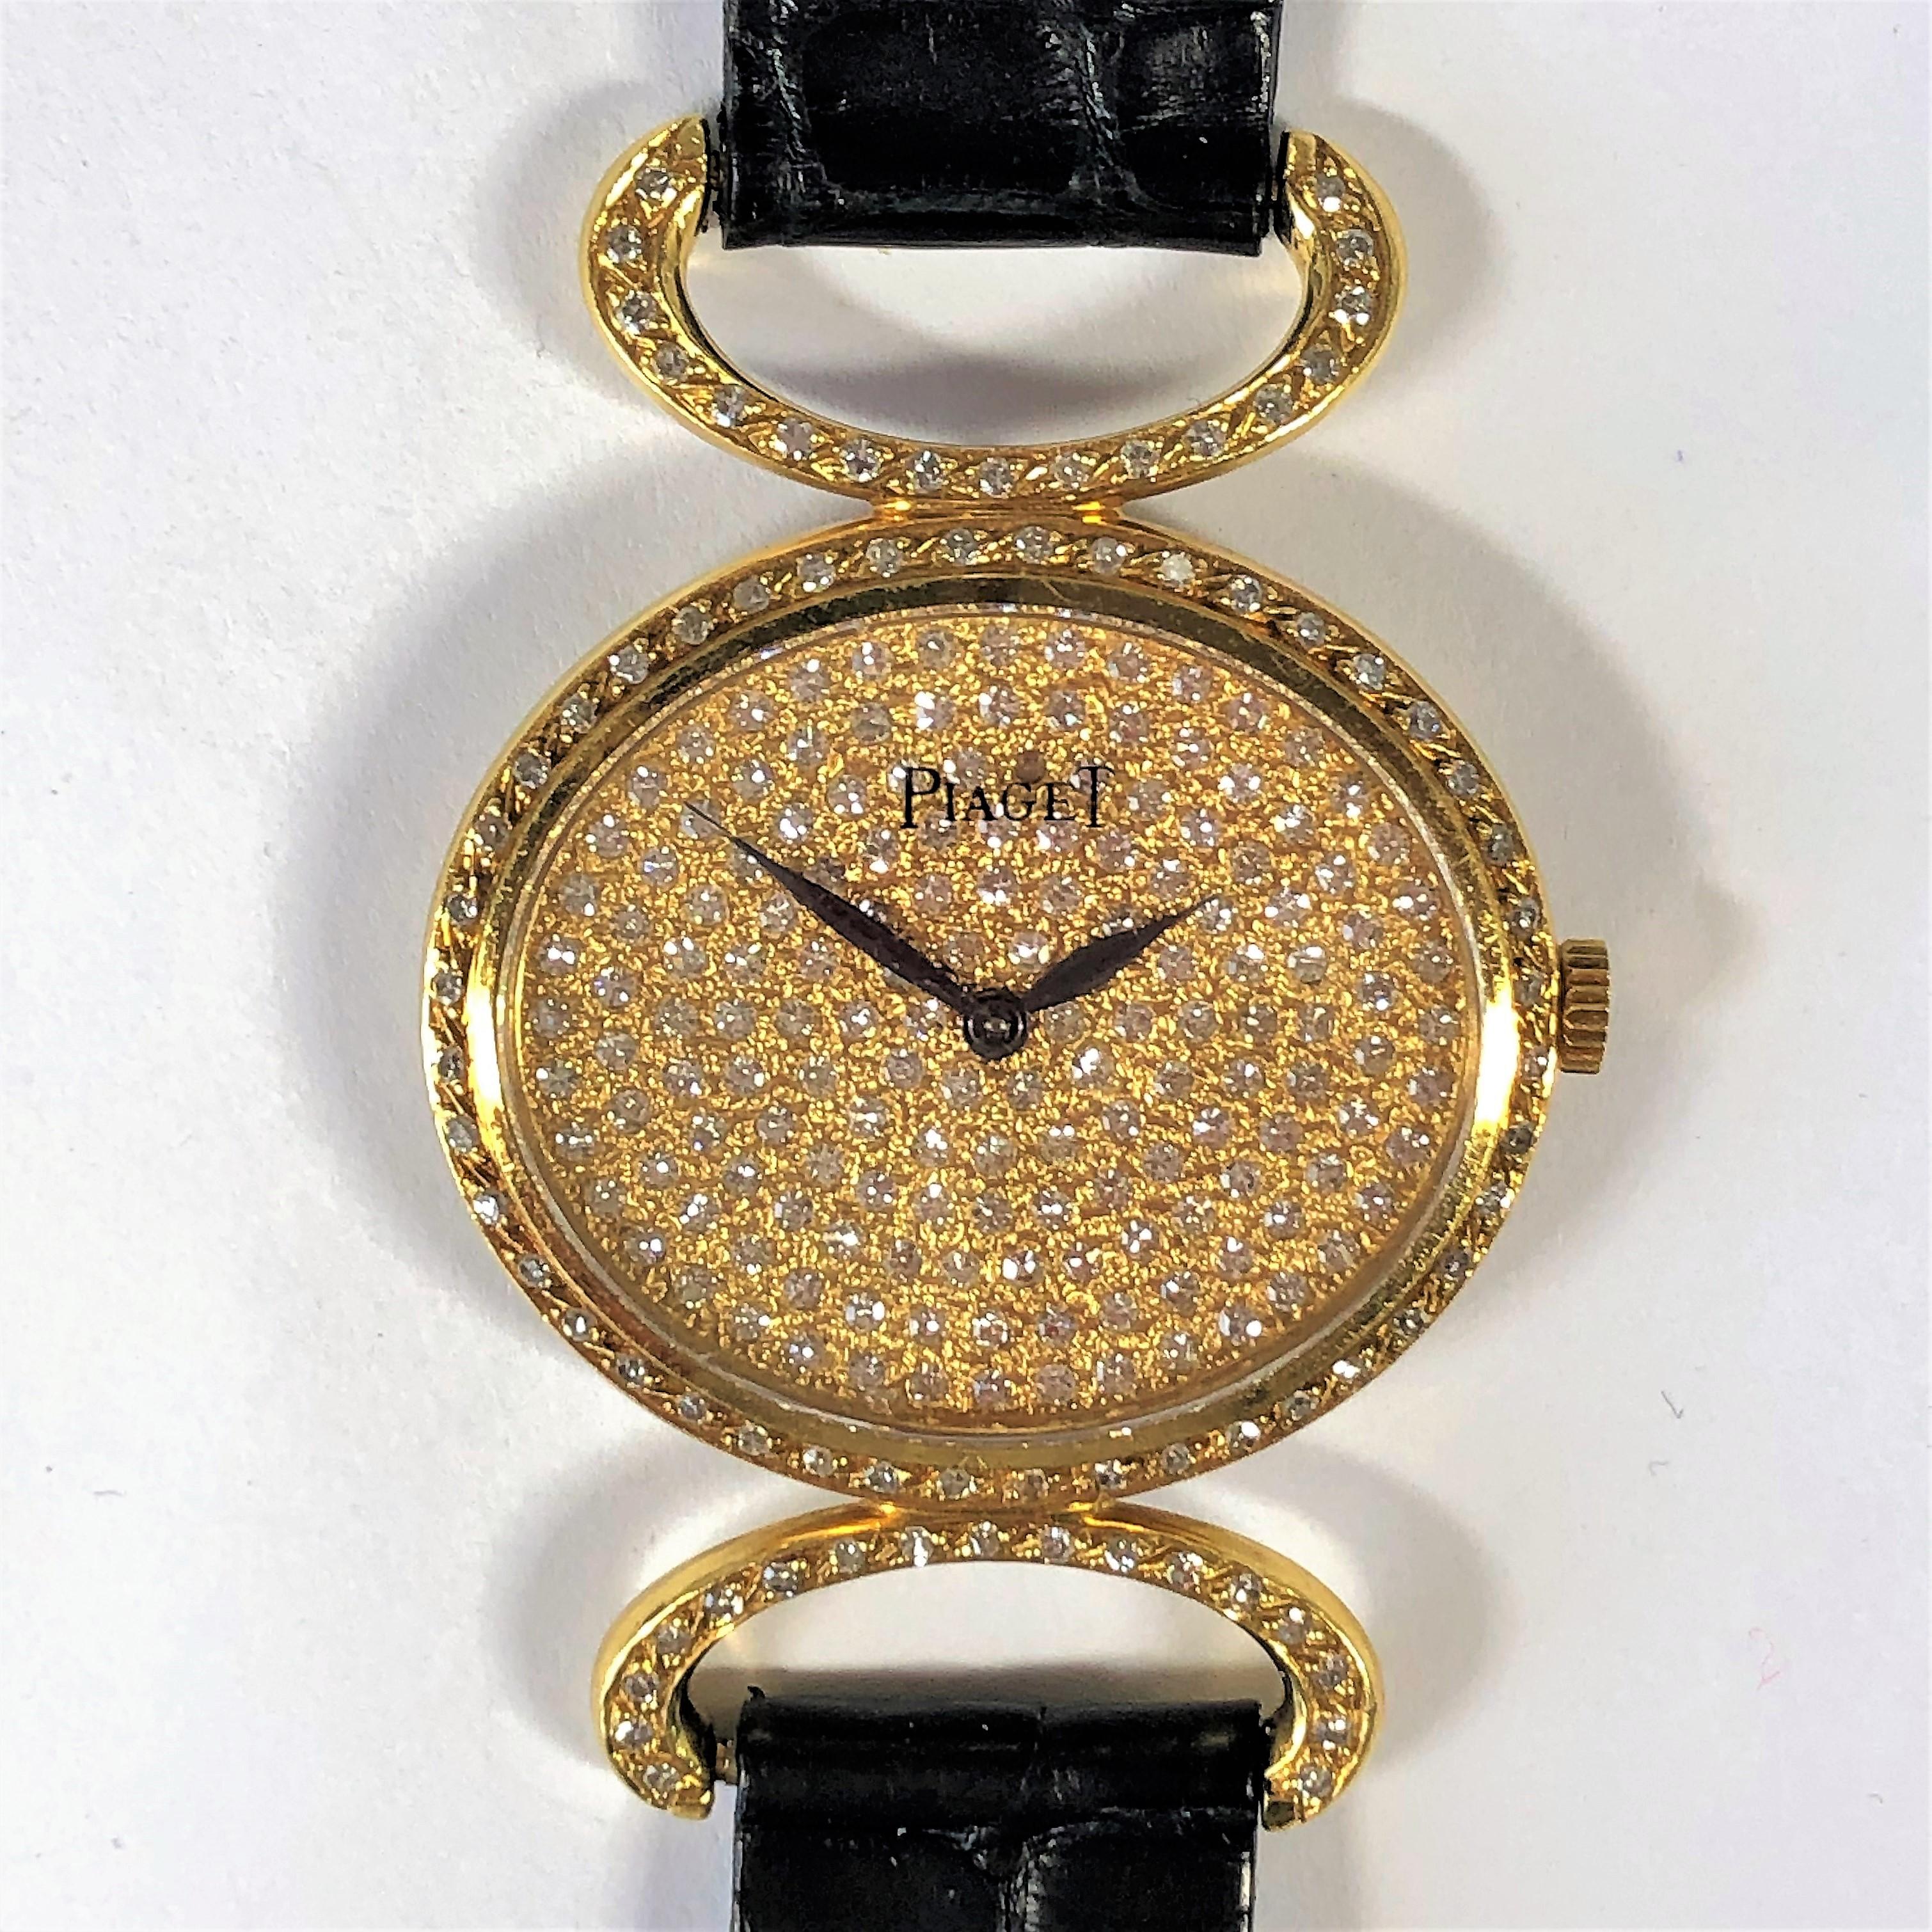 Piaget's elegant yet sporty 18K gold and diamond wristwatch is masterfully designed, with 4 sections of black, alligator strap, connected by gold and diamond encrusted stations matching the diamond encrusted lugs and diamond encrusted buckle. The